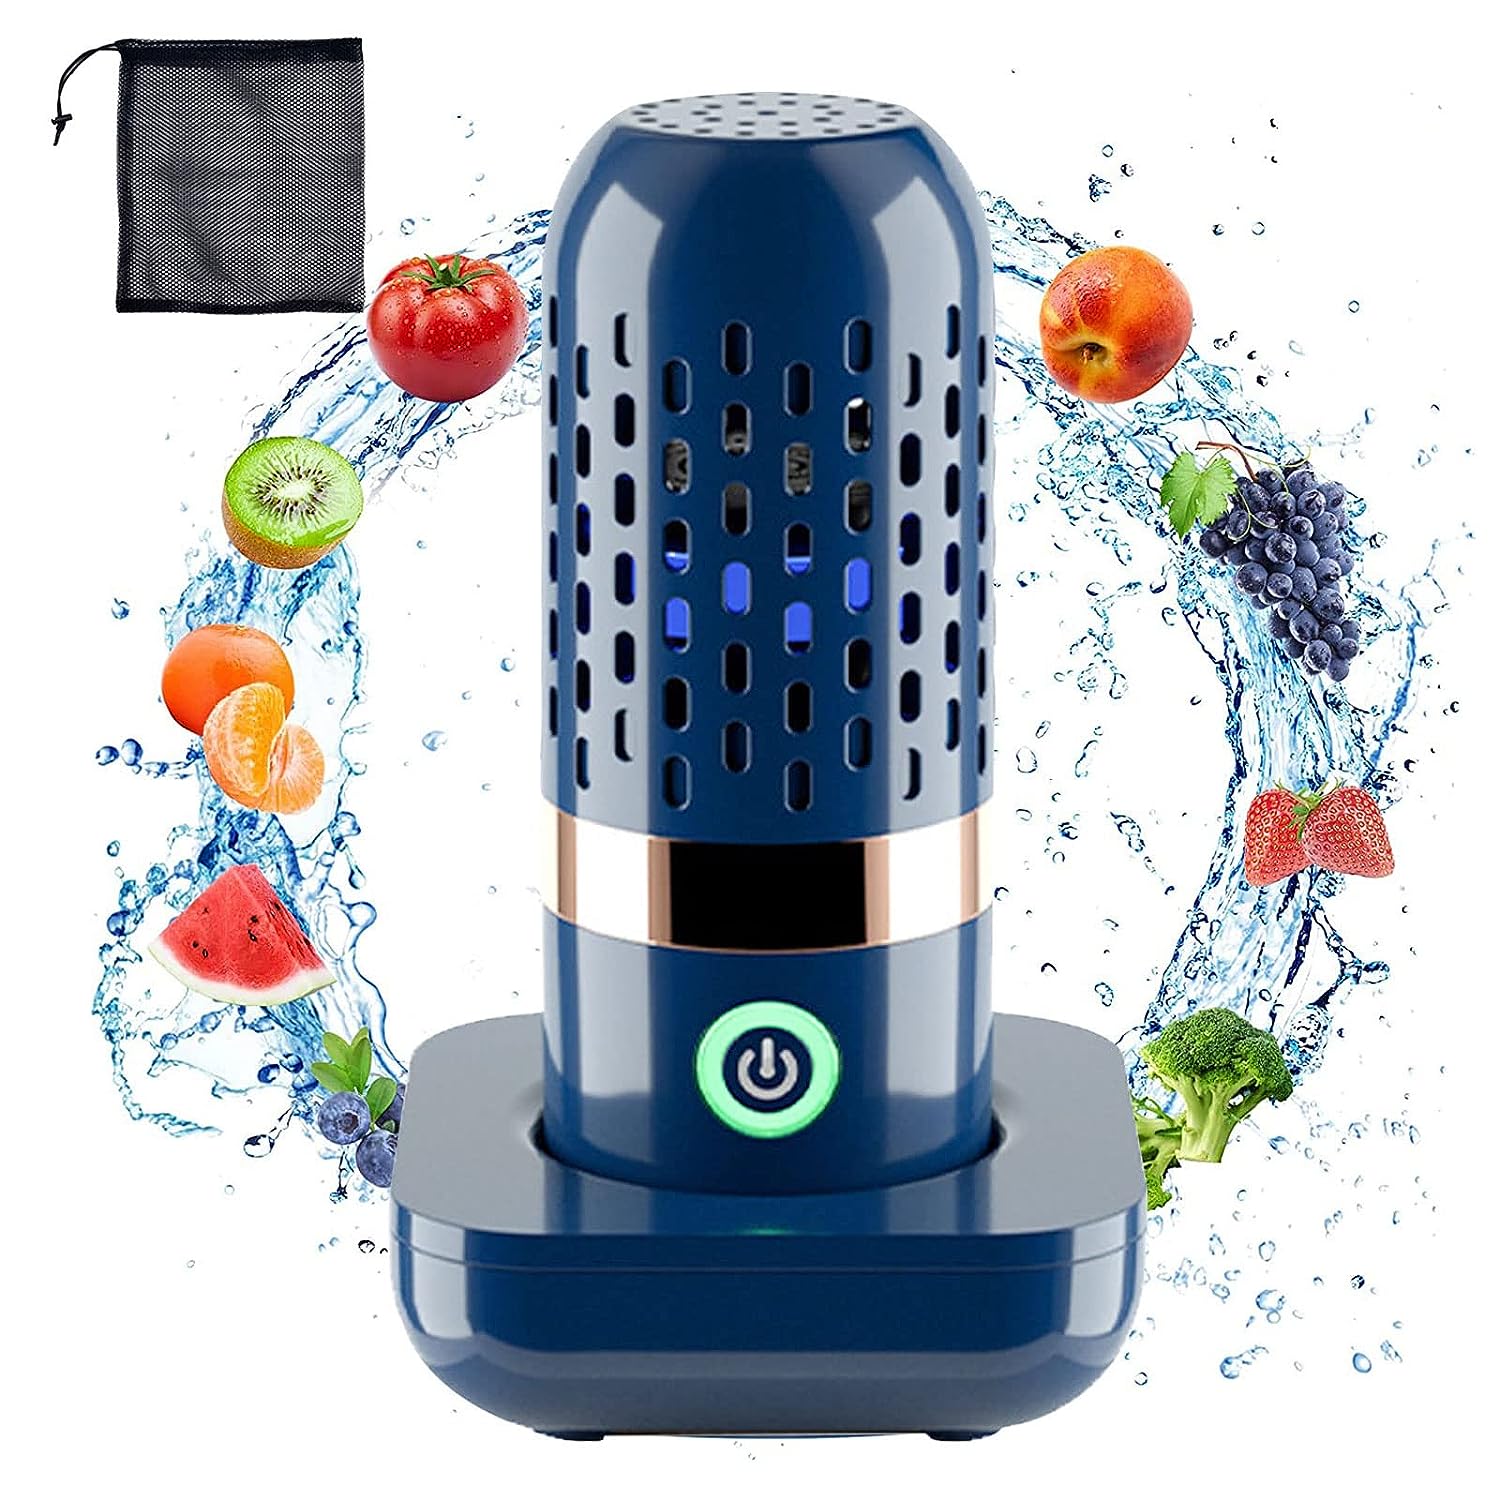 Fruit and Vegetable Washing Machine, Portable Wireless Disinfectant Machine for Household, IPX 7,3000 mAh, USB Rechargeable Food Cleaner, for Removing Pesticide Residues Fruit, Vegetables